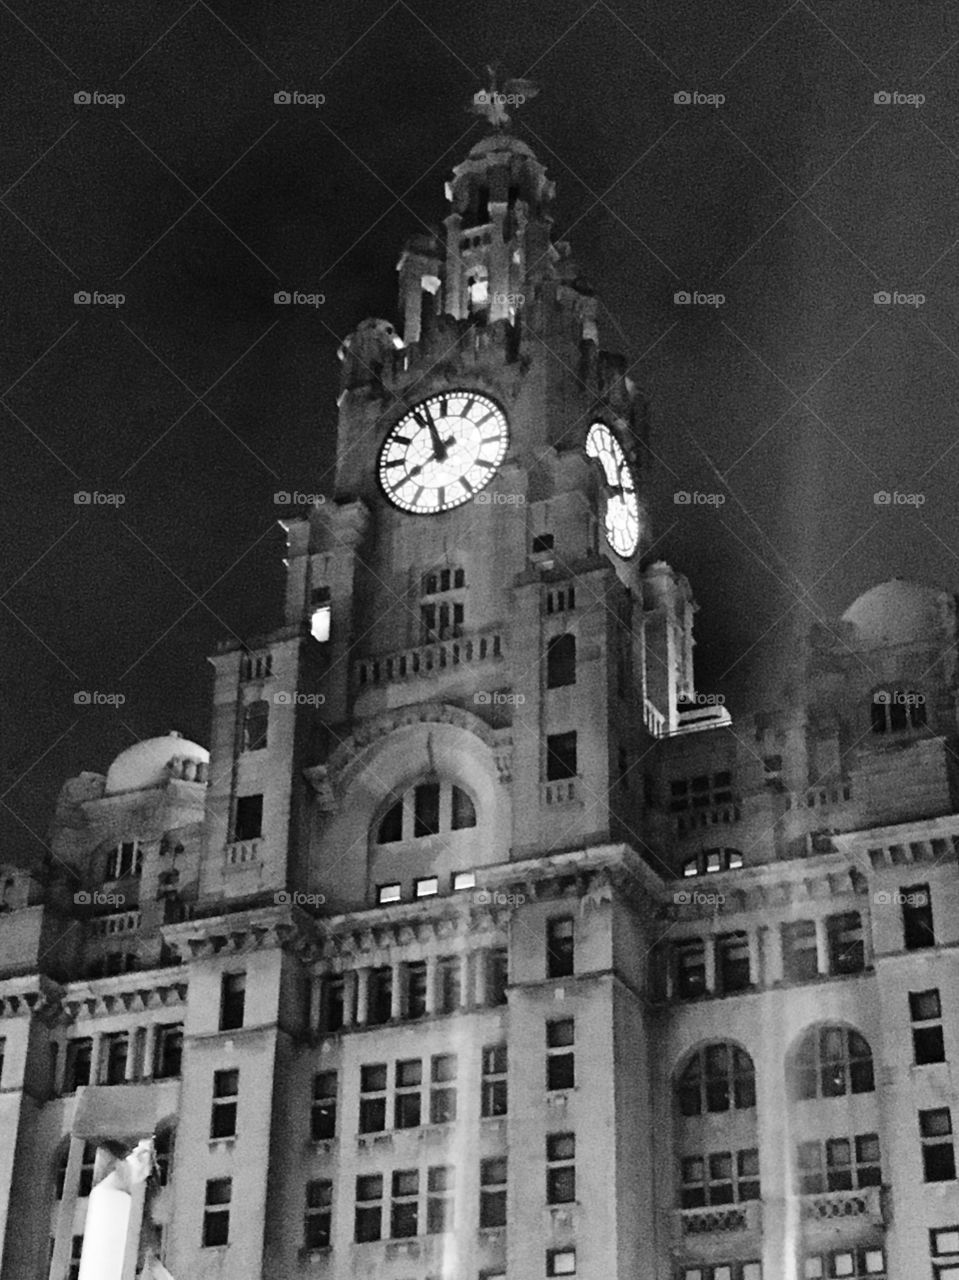 The Liver Buildings at night.